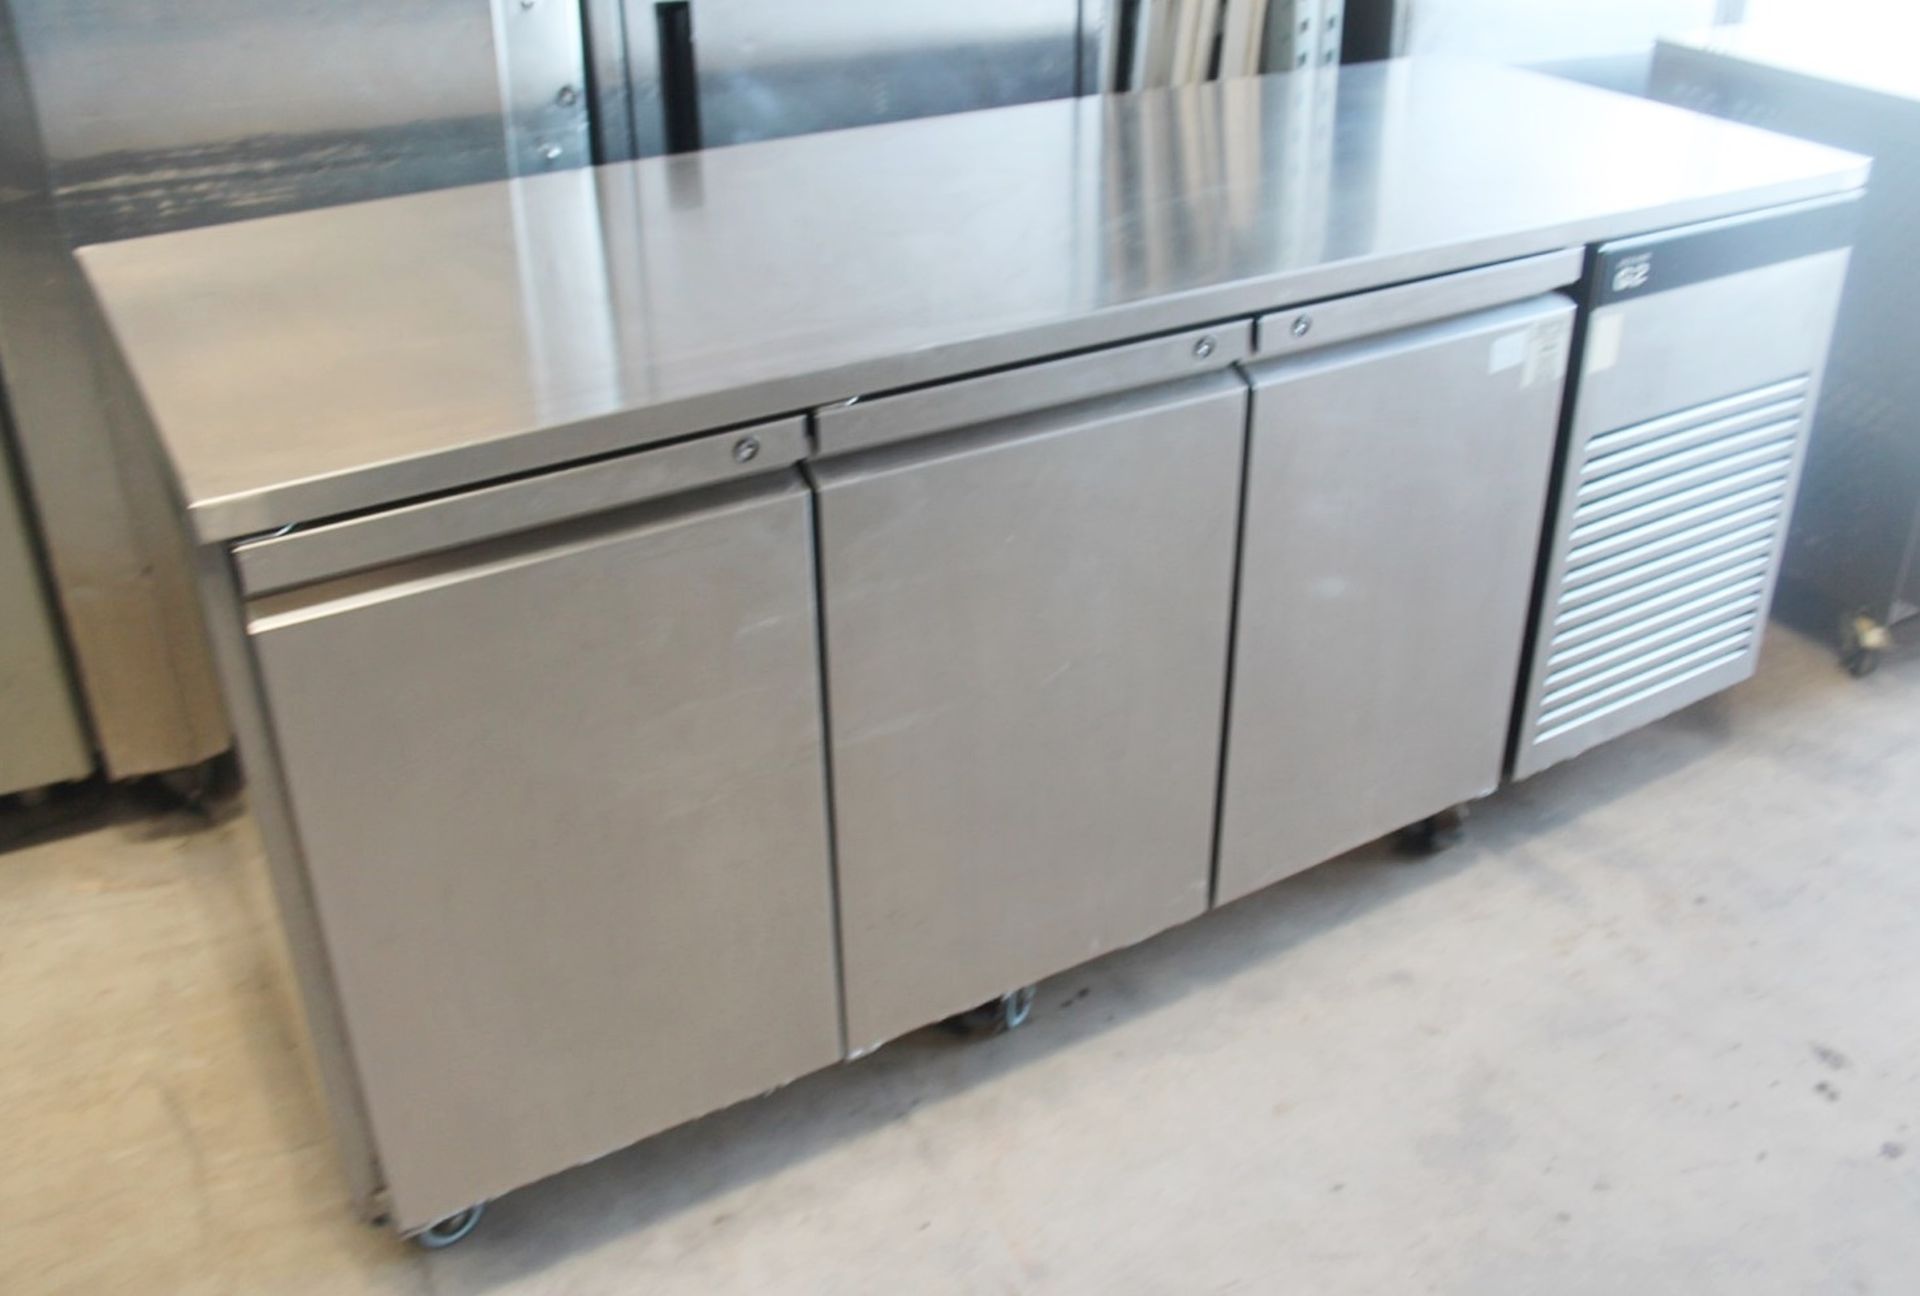 1 x Fosters EcoPro G2 3-Door Commercial Refrigerated Counter - Ref: GEN591 WH2 - CL802 UX